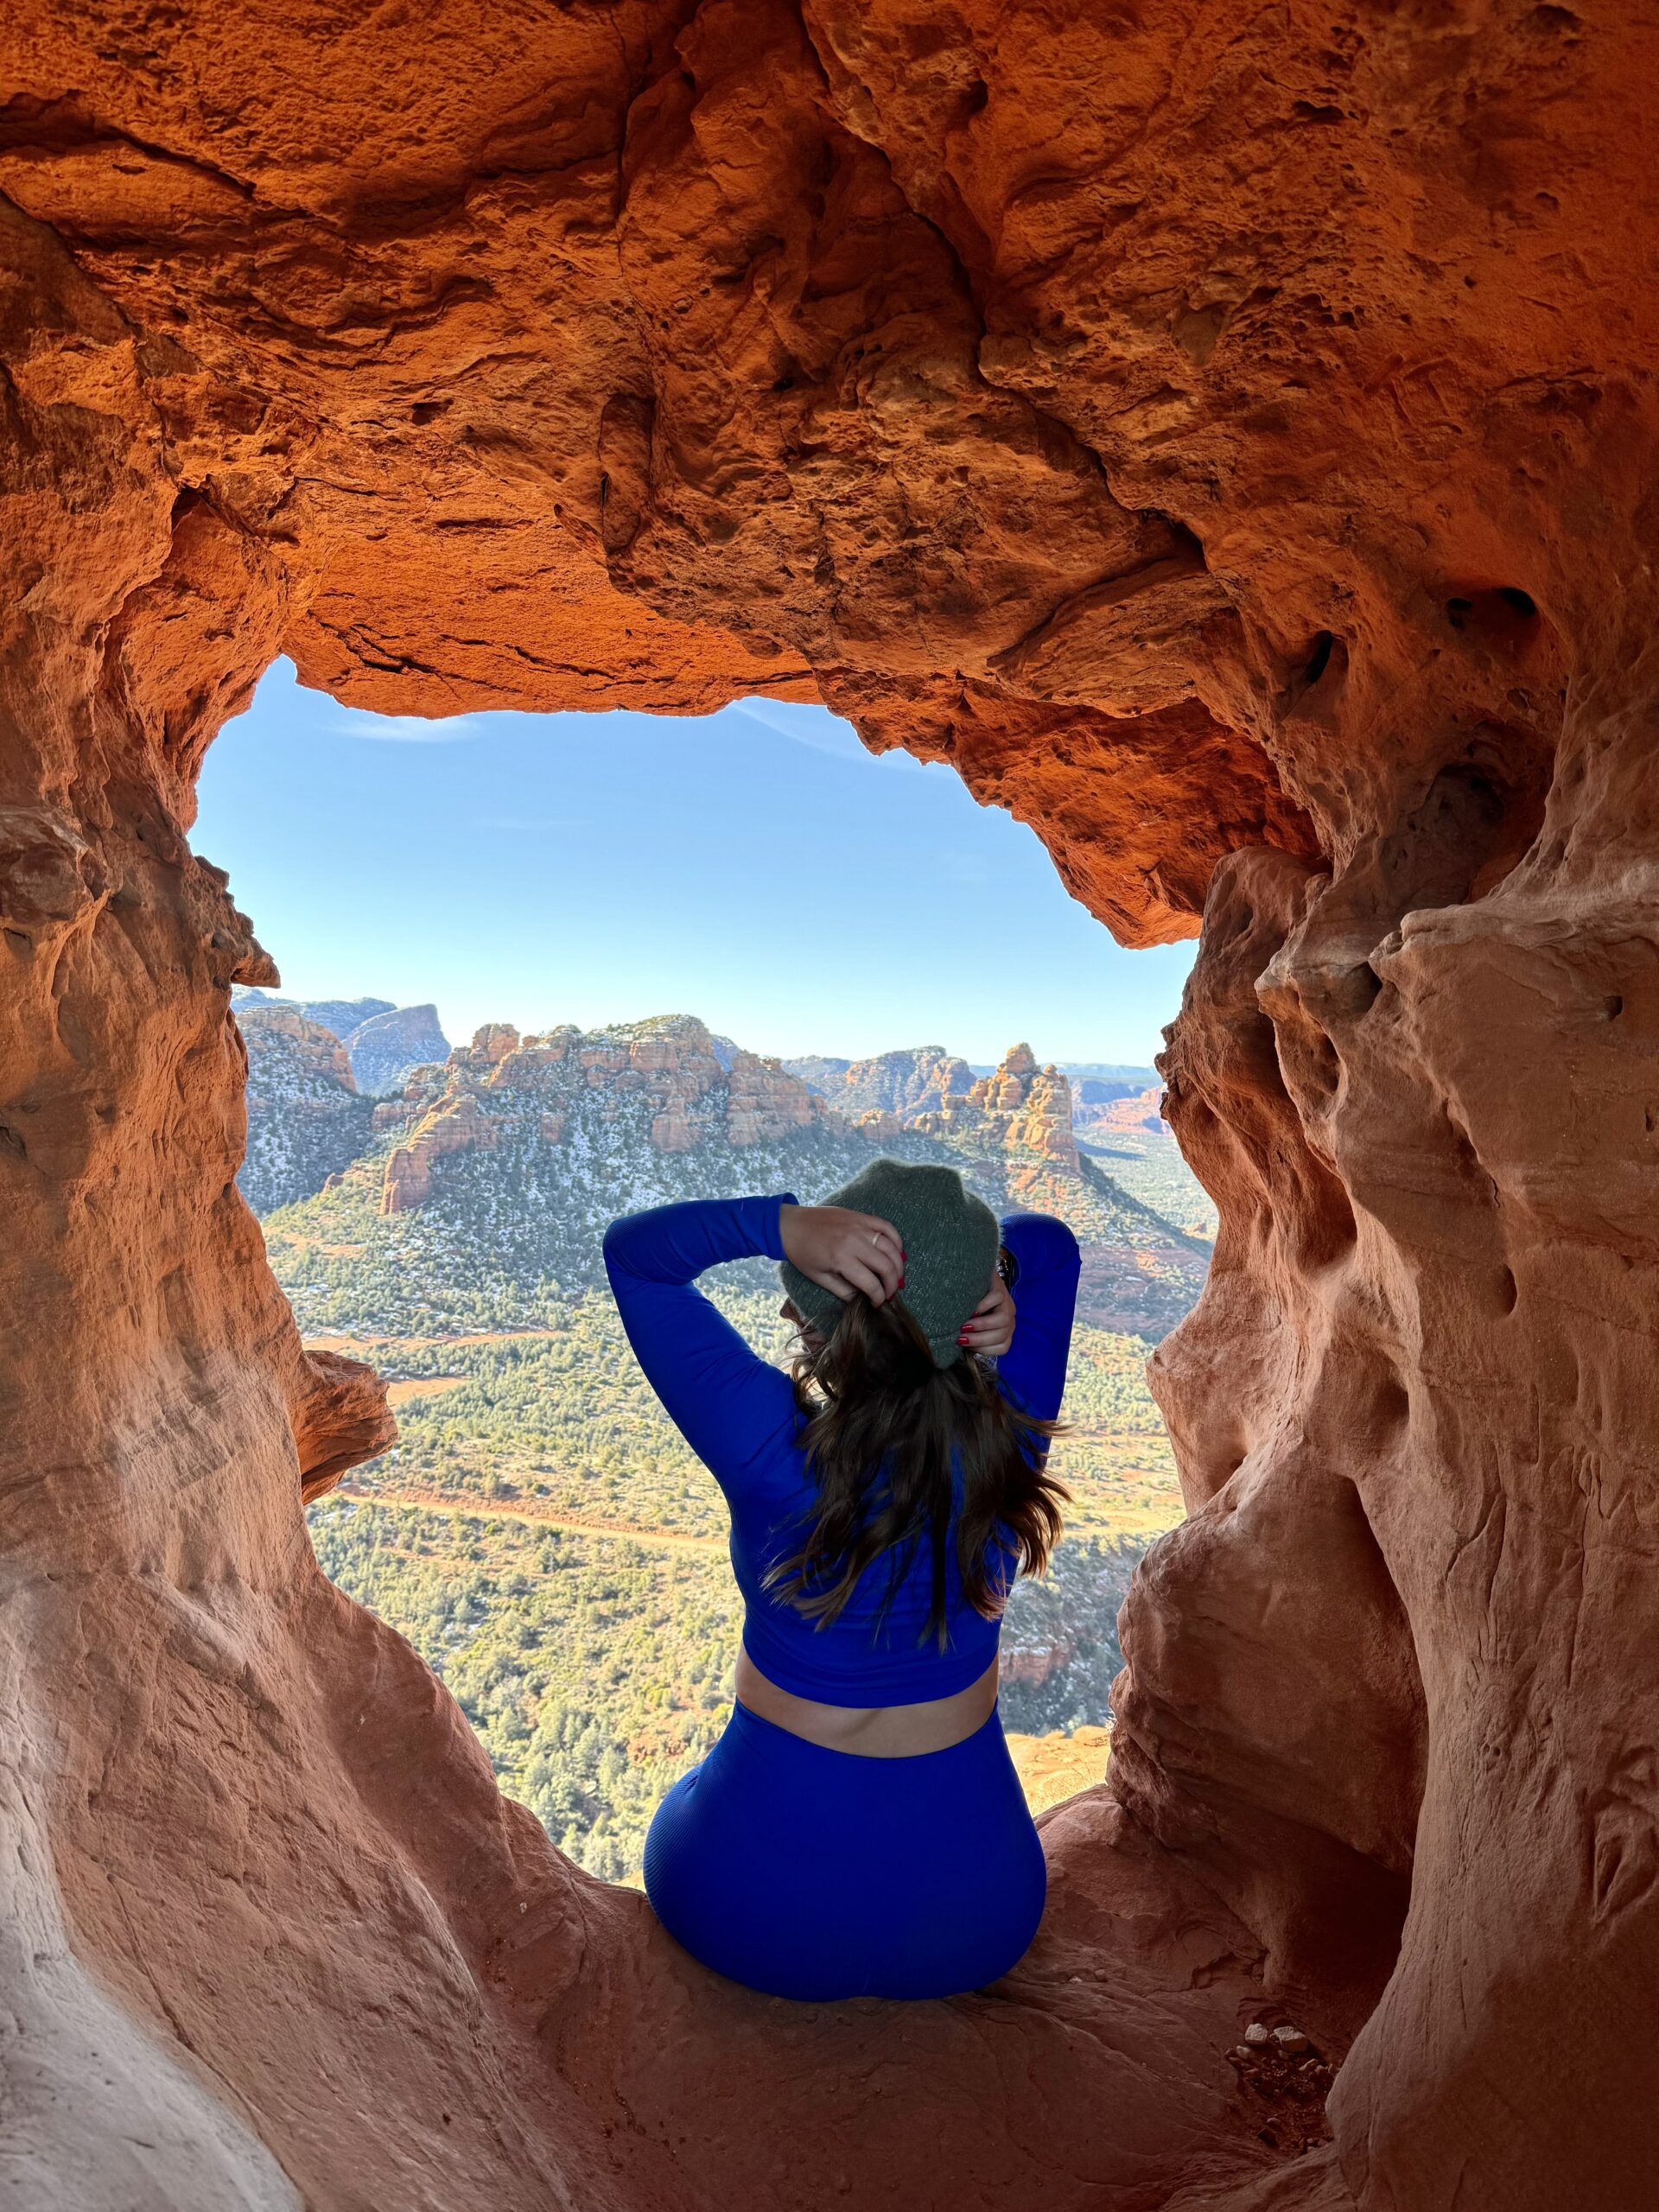 The Schnebly Hill Windows: Hidden Caves in Sedona